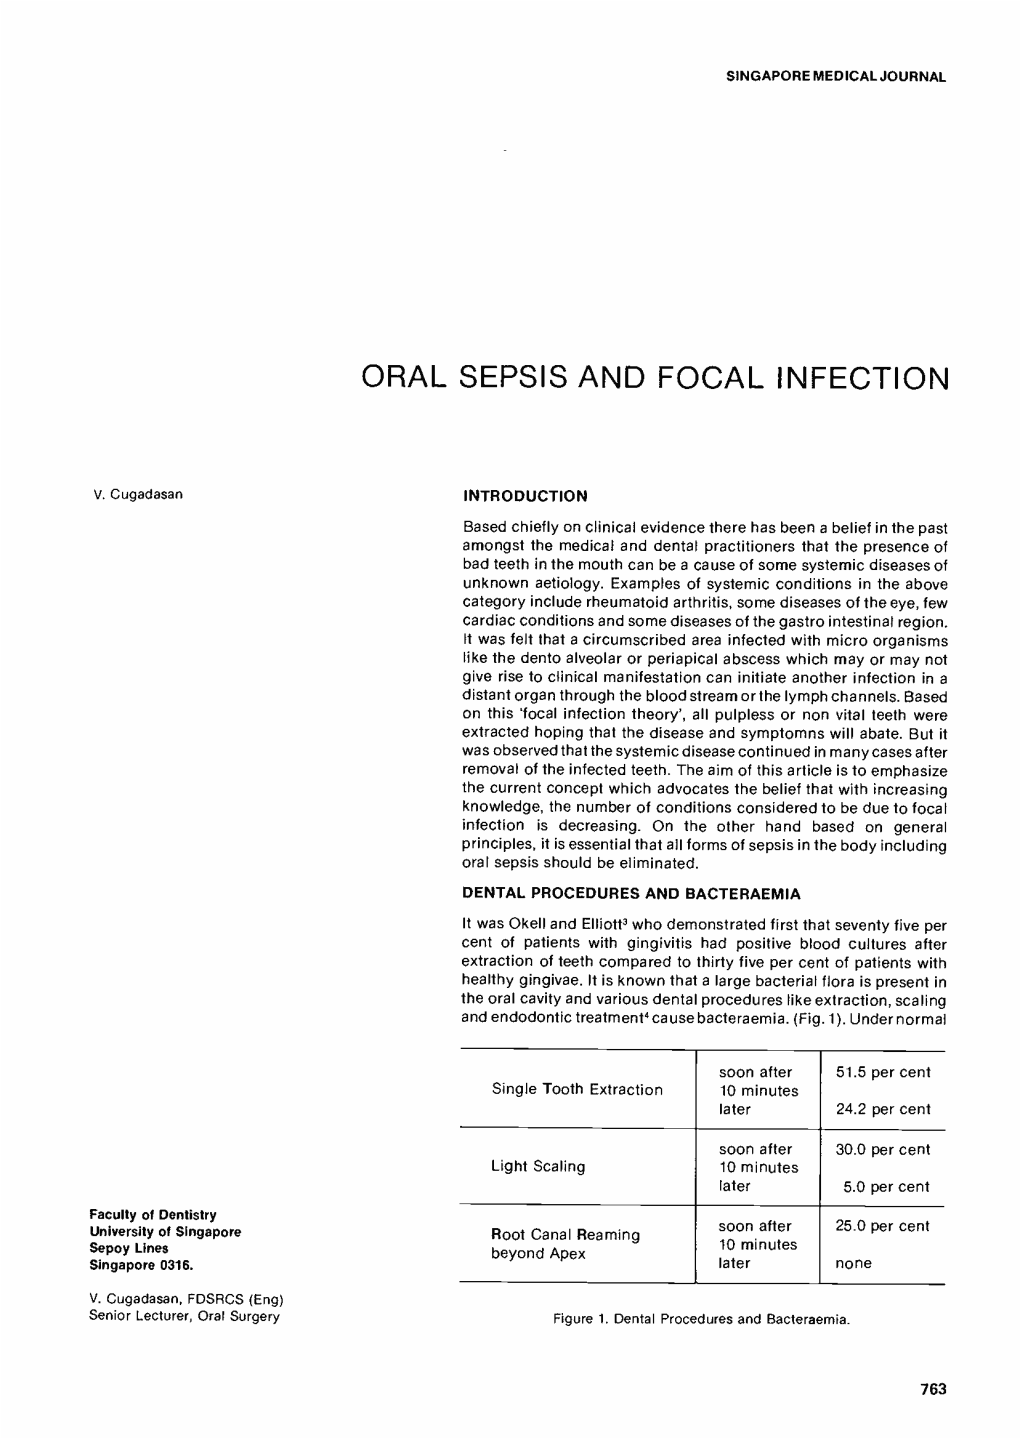 Oral Sepsis and Focal Infection